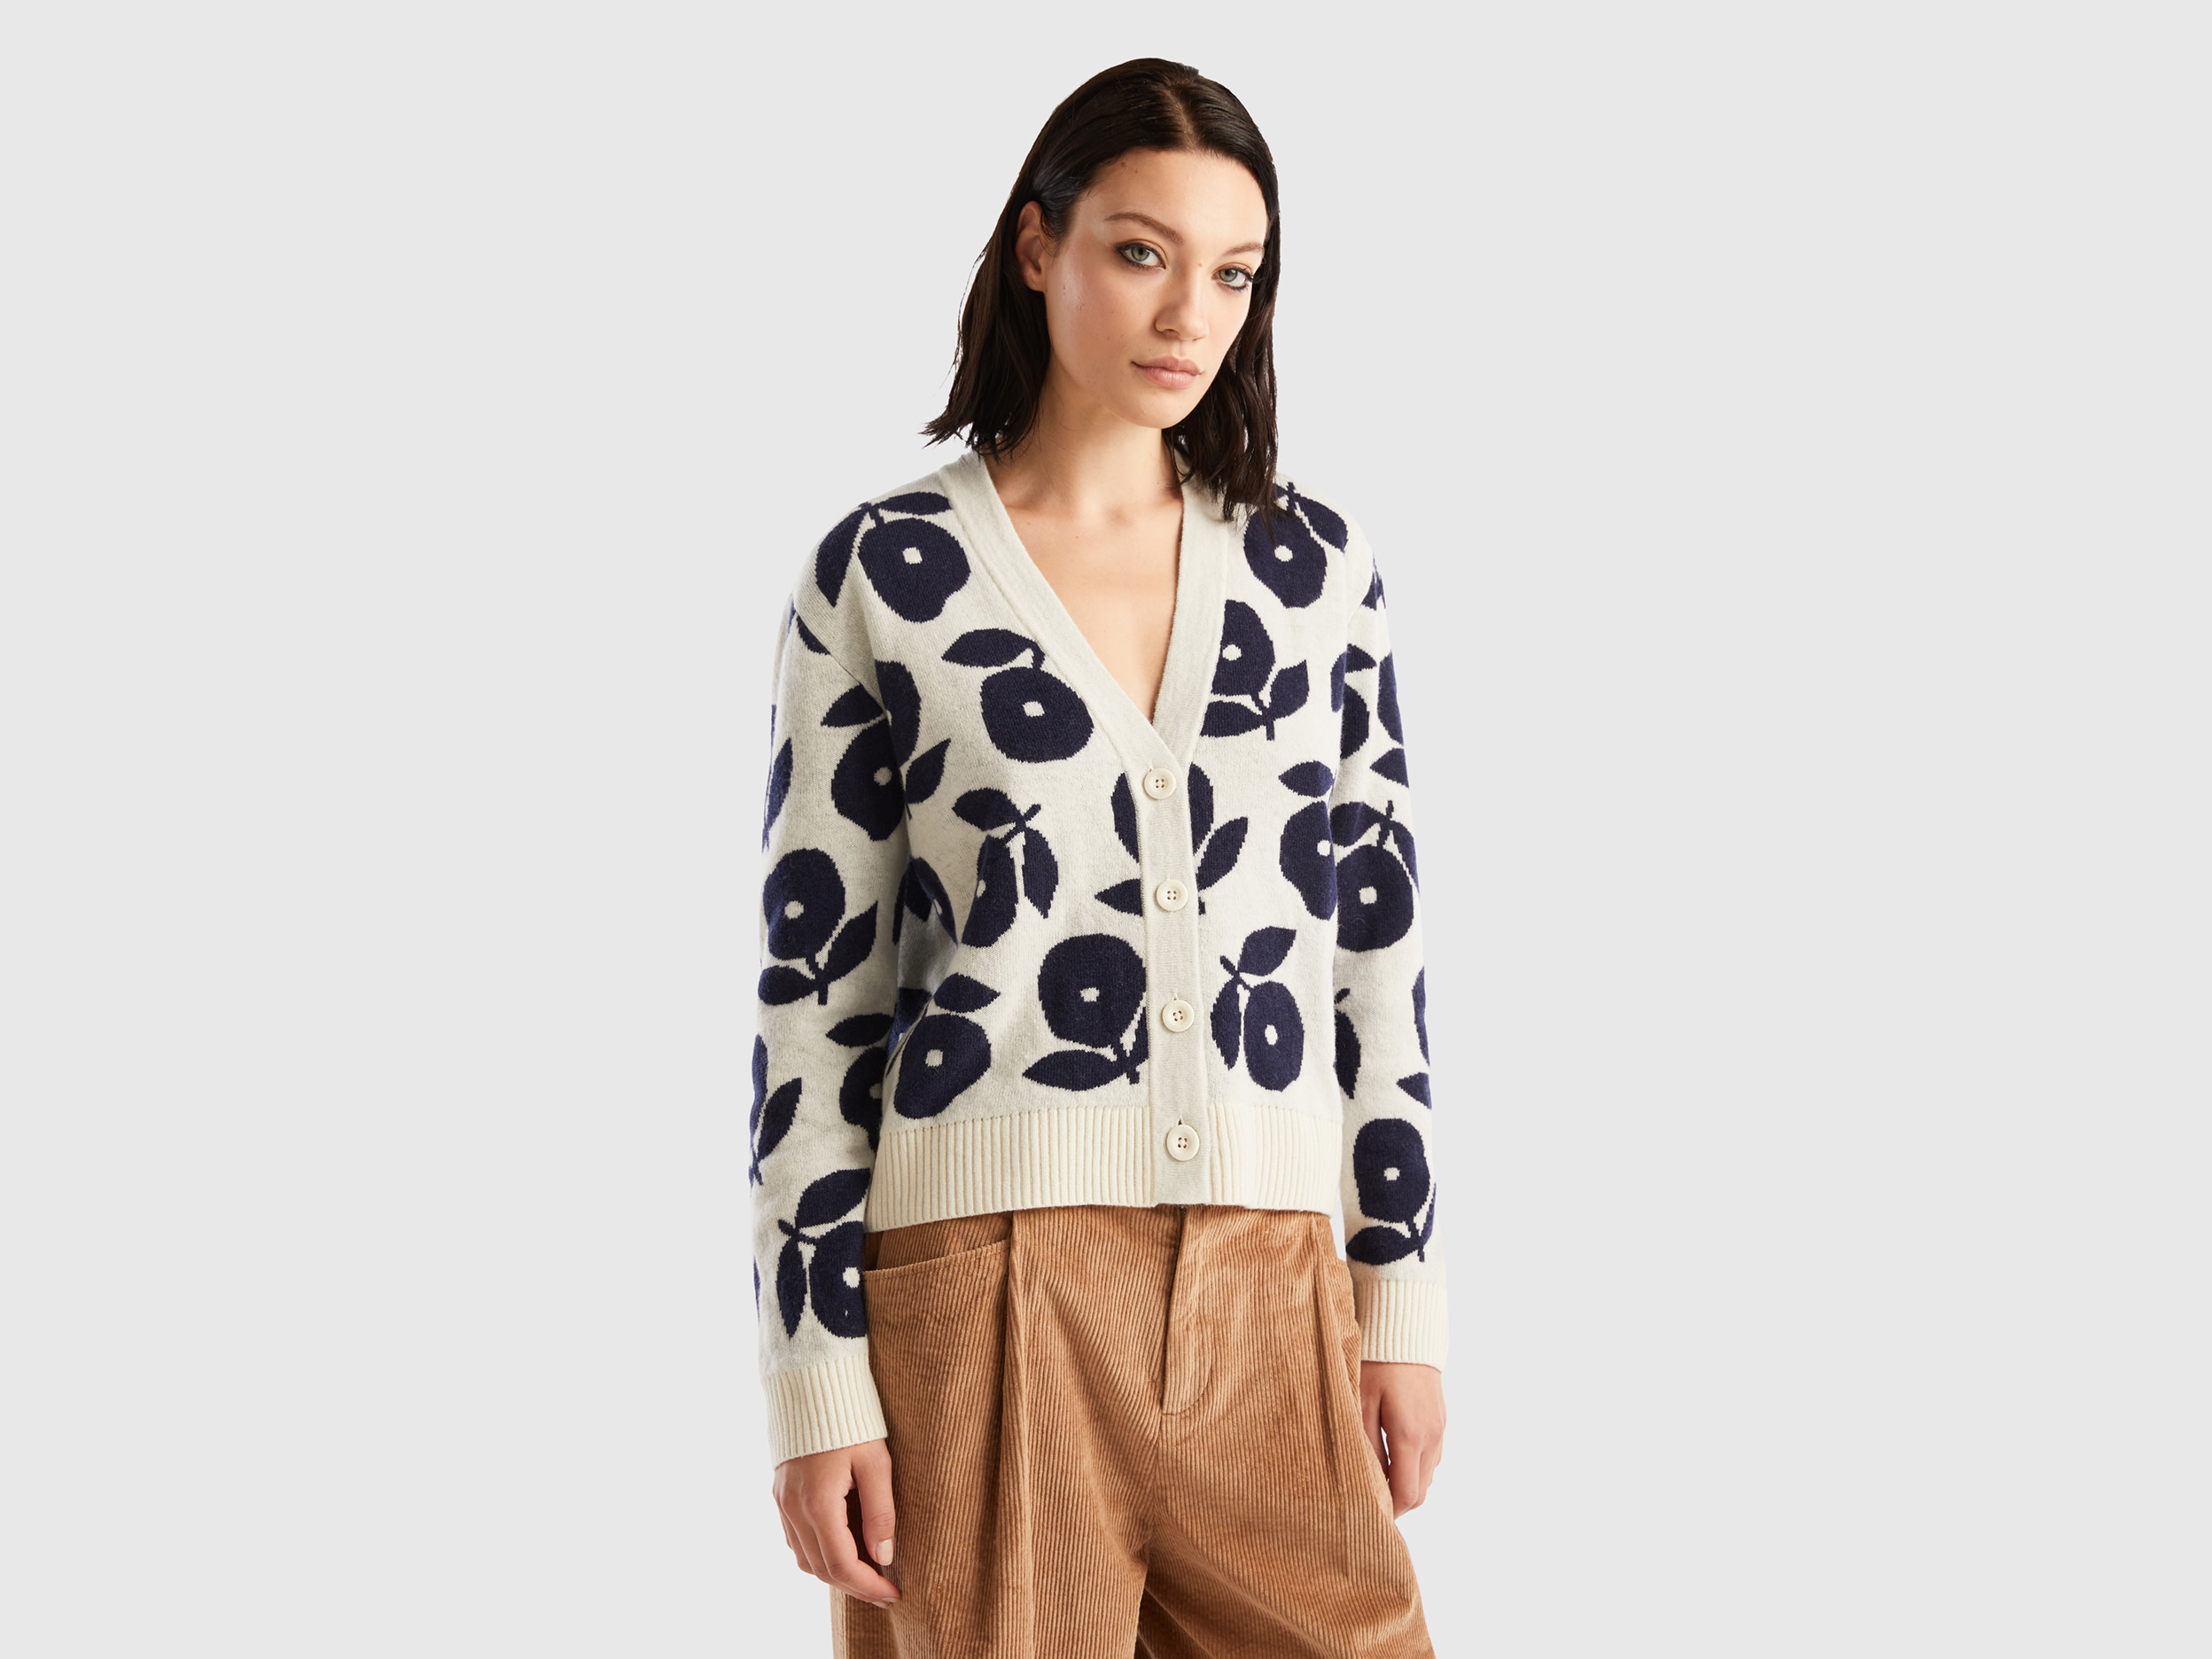 Benetton, Cardigan With Floral Inlays, size L-XL, Creamy White, Women